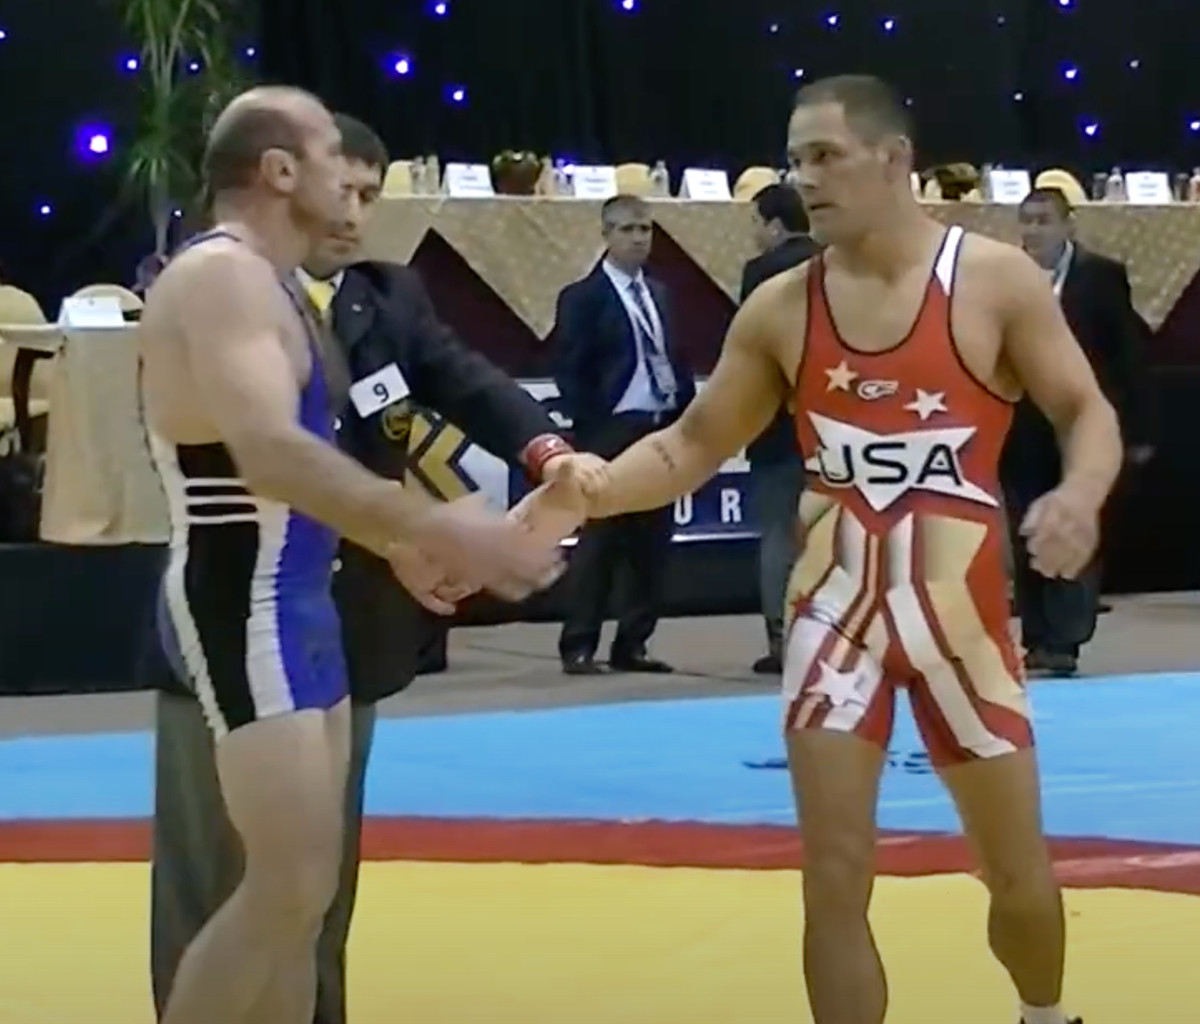 Mike Schyck, right, features in an upcoming documentary on the Ohio State sexual abuse scandal. Pictured at the 2013 Veterans World Freestyle Championships (YouTube / screenshot)